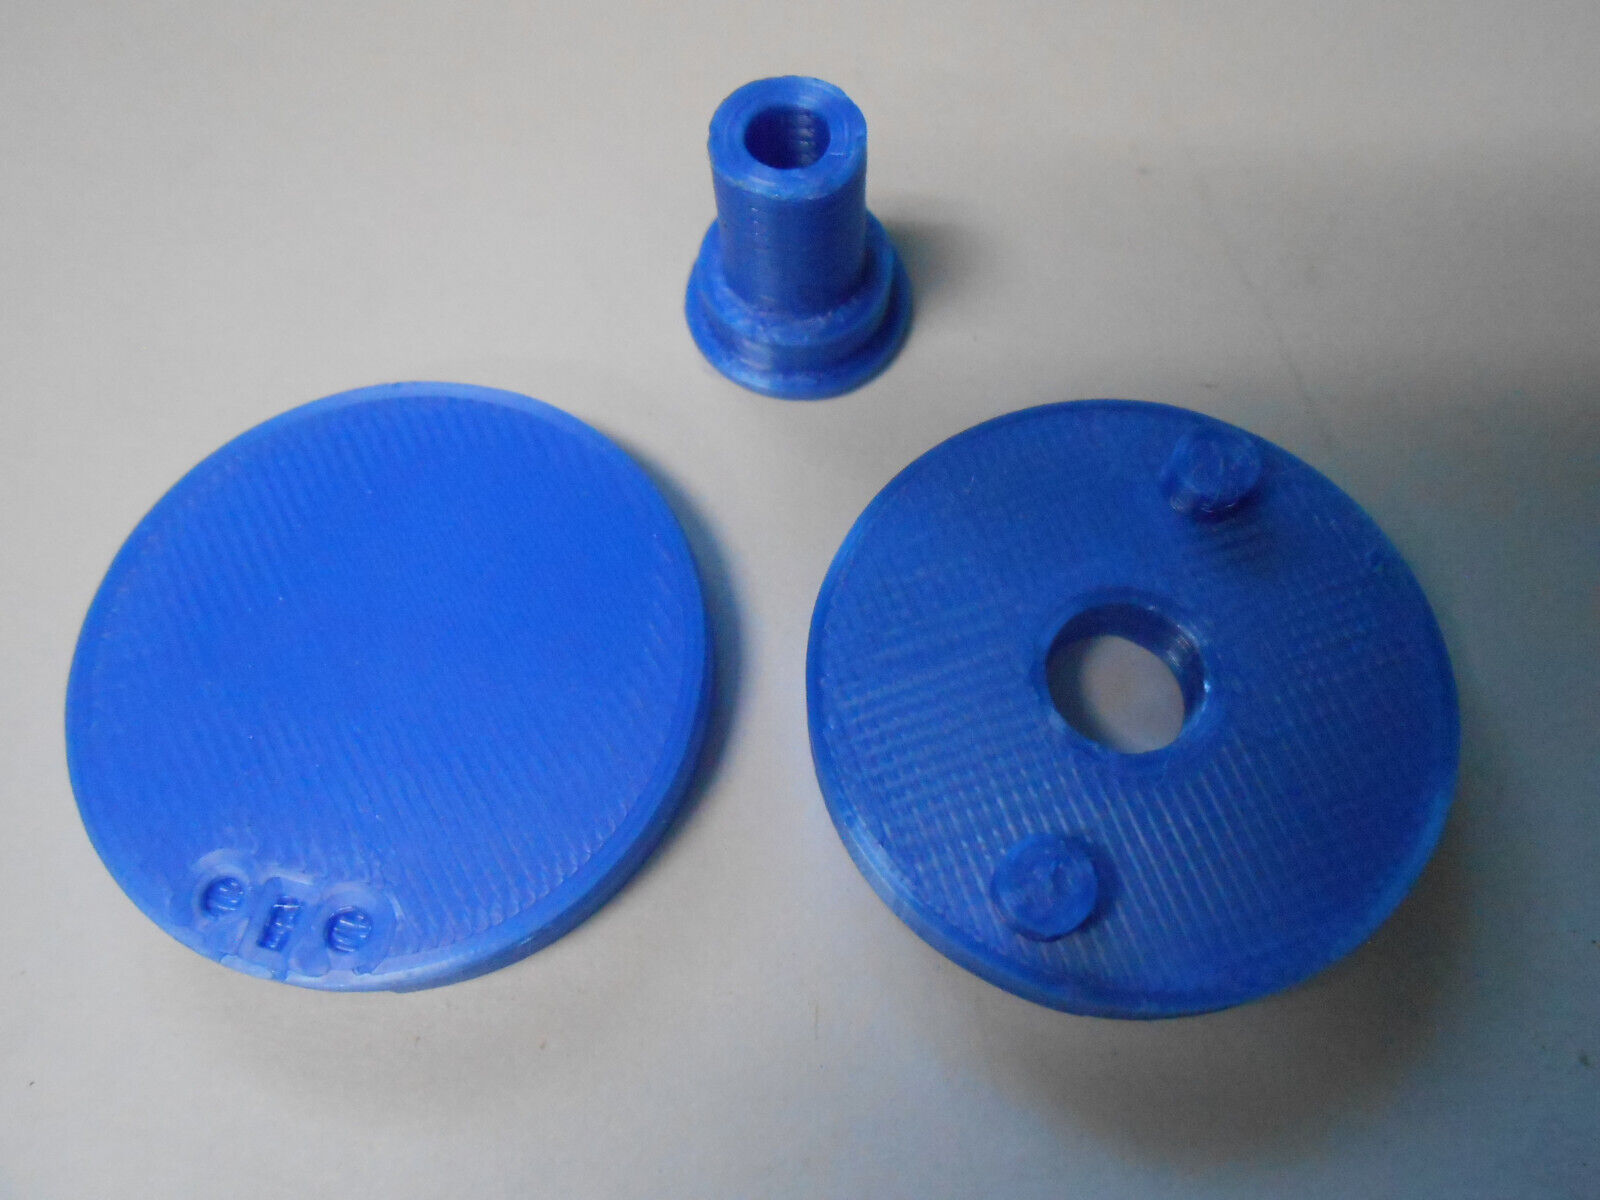 Commodore SX-64 Handle End Cap Mount Assembly =Set of 2= 3D Printed Blue & Black